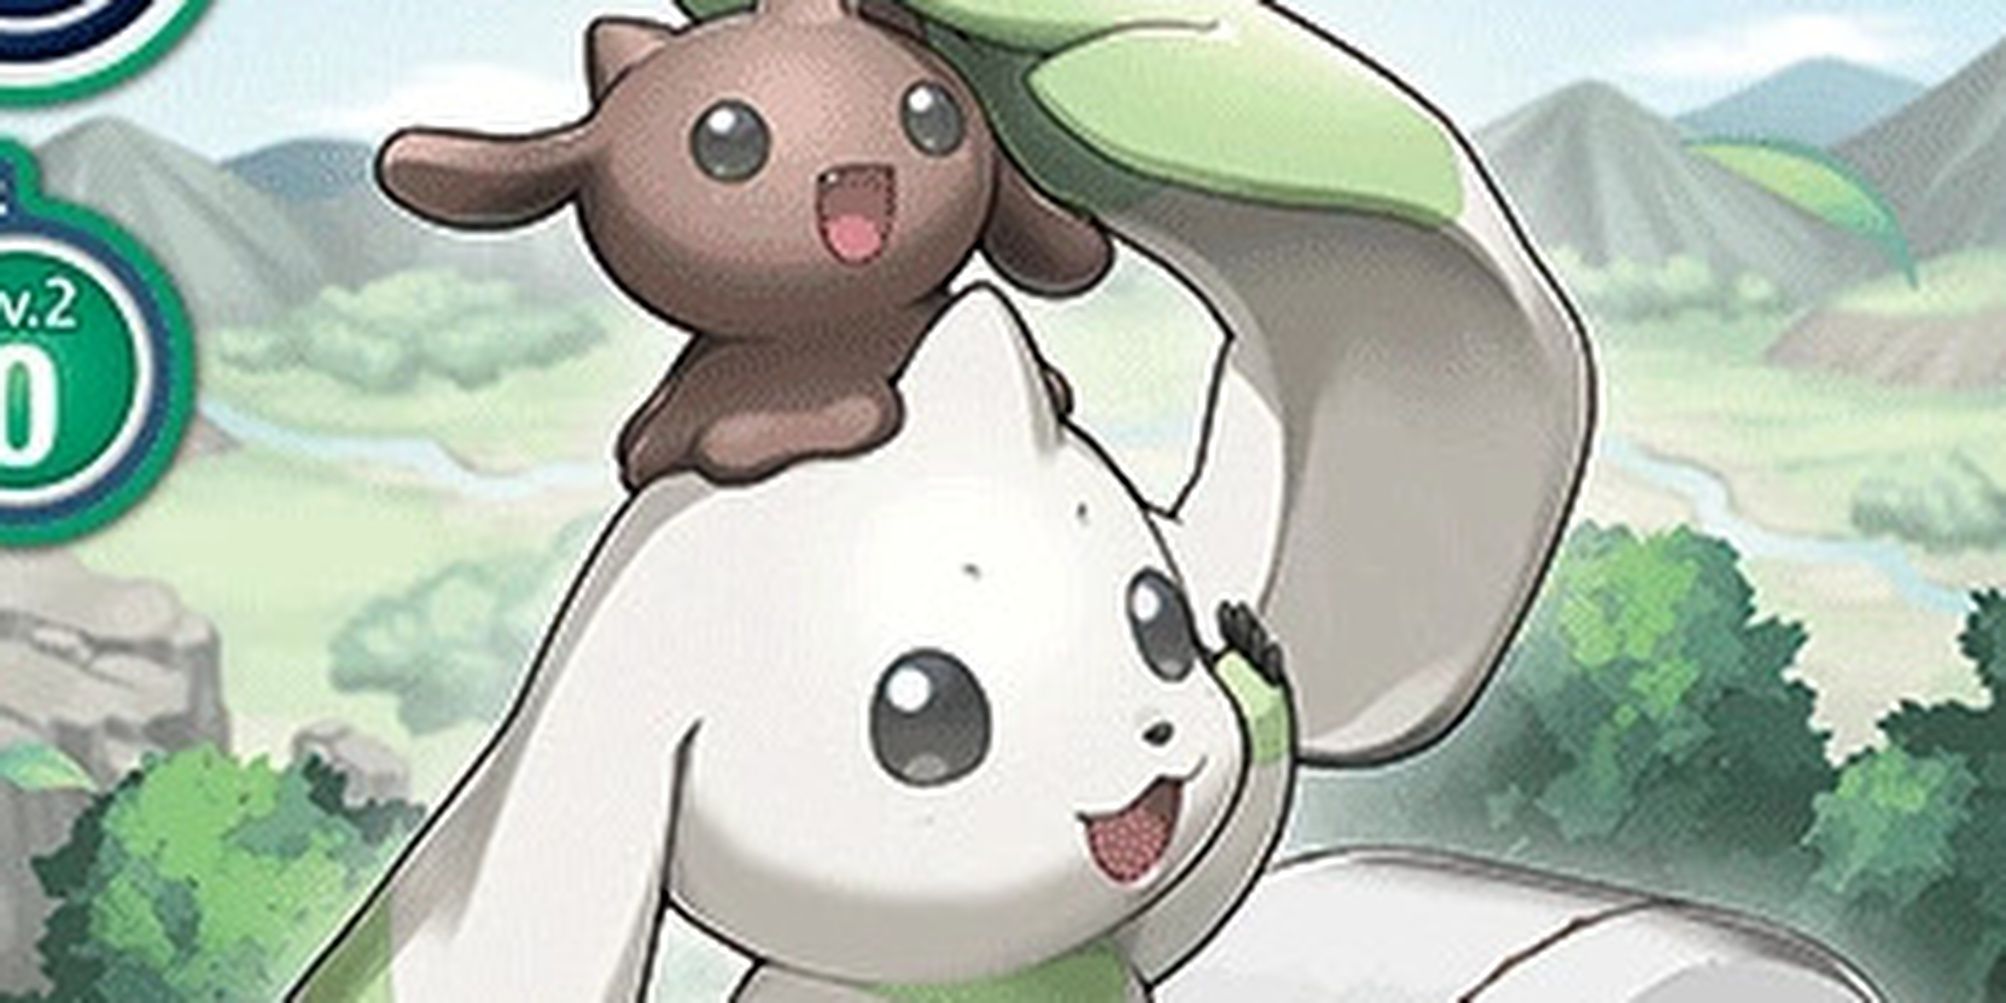 bt3 terriermon card art cropped from digimon tcg